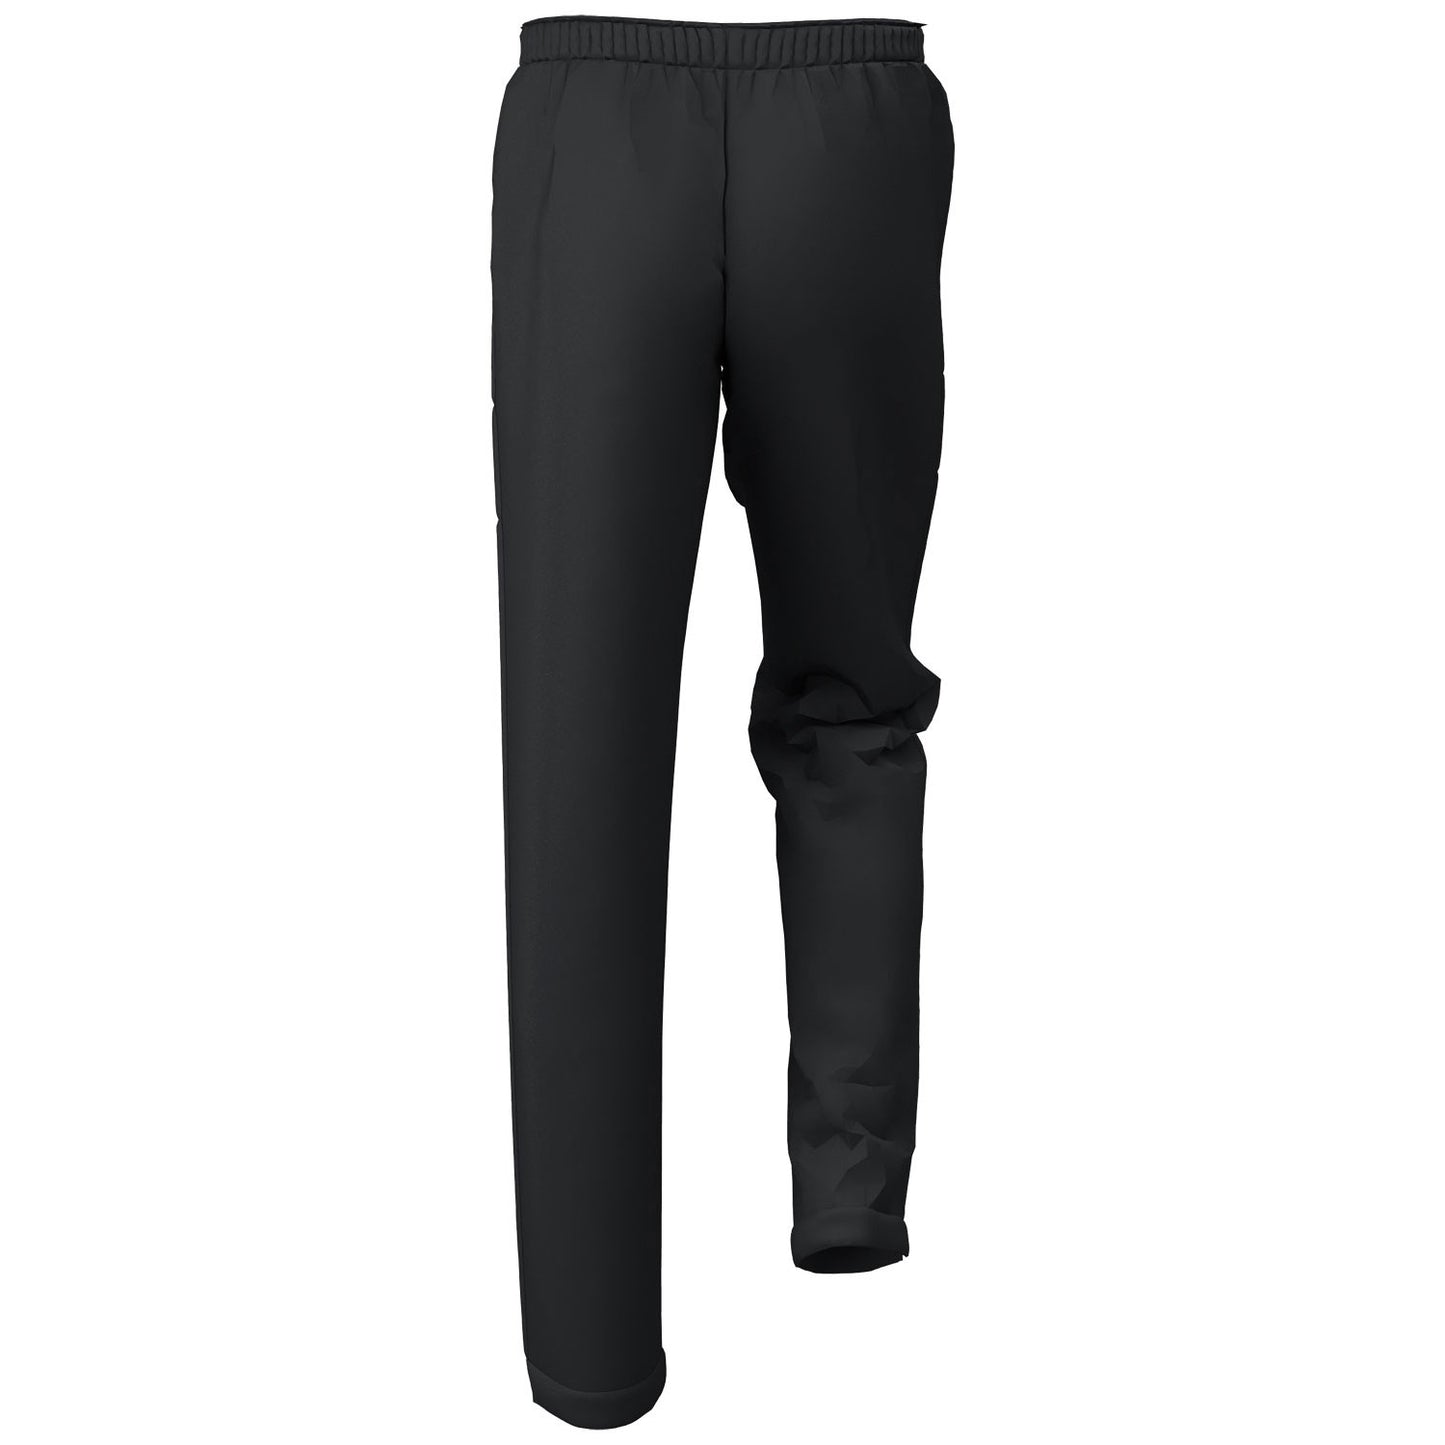 Grey College Boat Club Standard Tracksuit Trousers